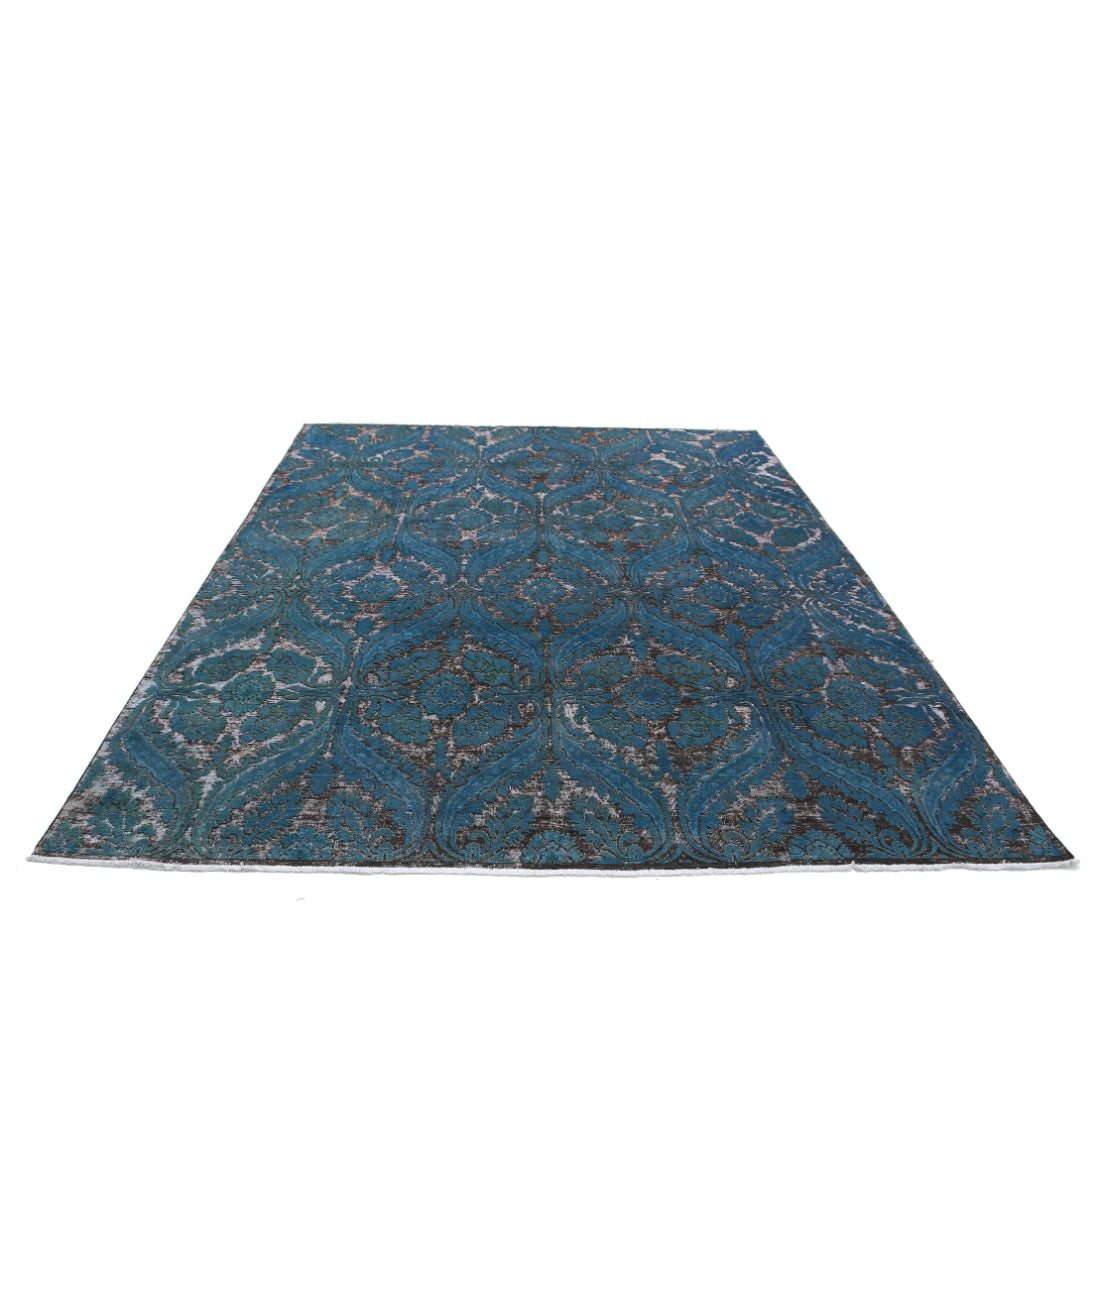 Hand Knotted Onyx Wool Rug - 7'11'' x 9'11'' 7'11'' x 9'11'' (238 X 298) / Blue / Blue